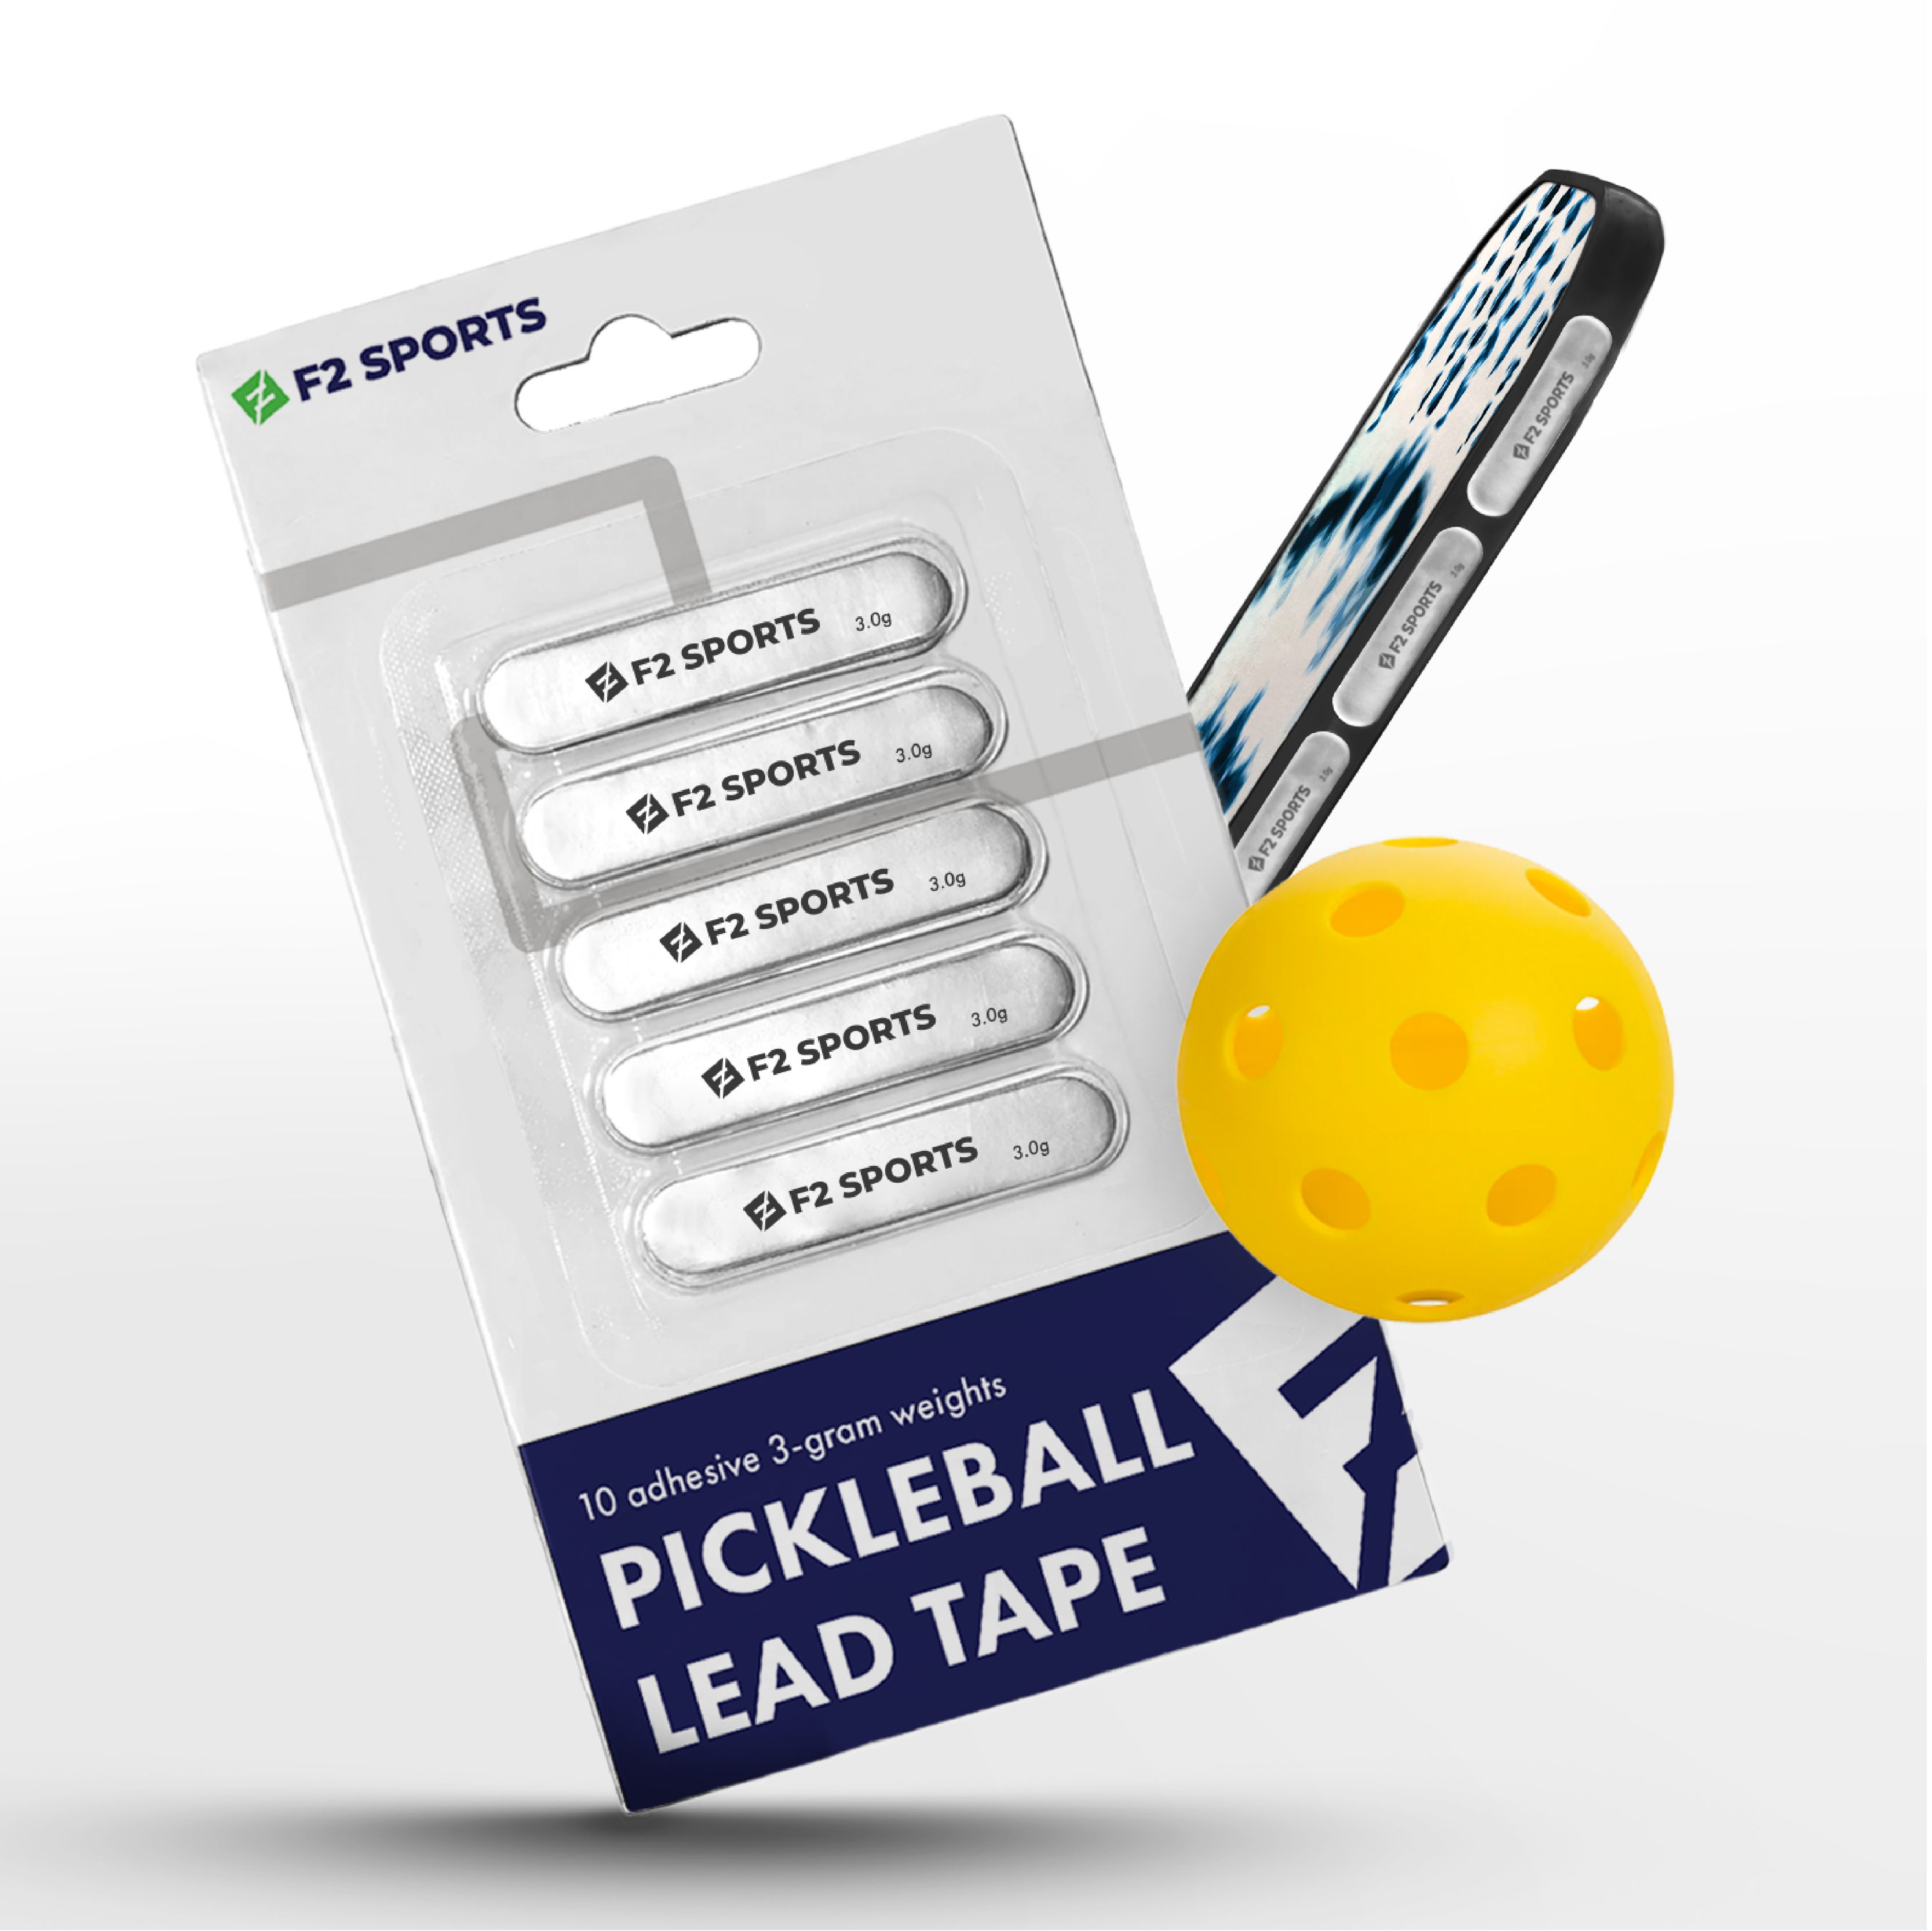 Pickleball Paddle Lead Tape- 10 pieces/3g weight